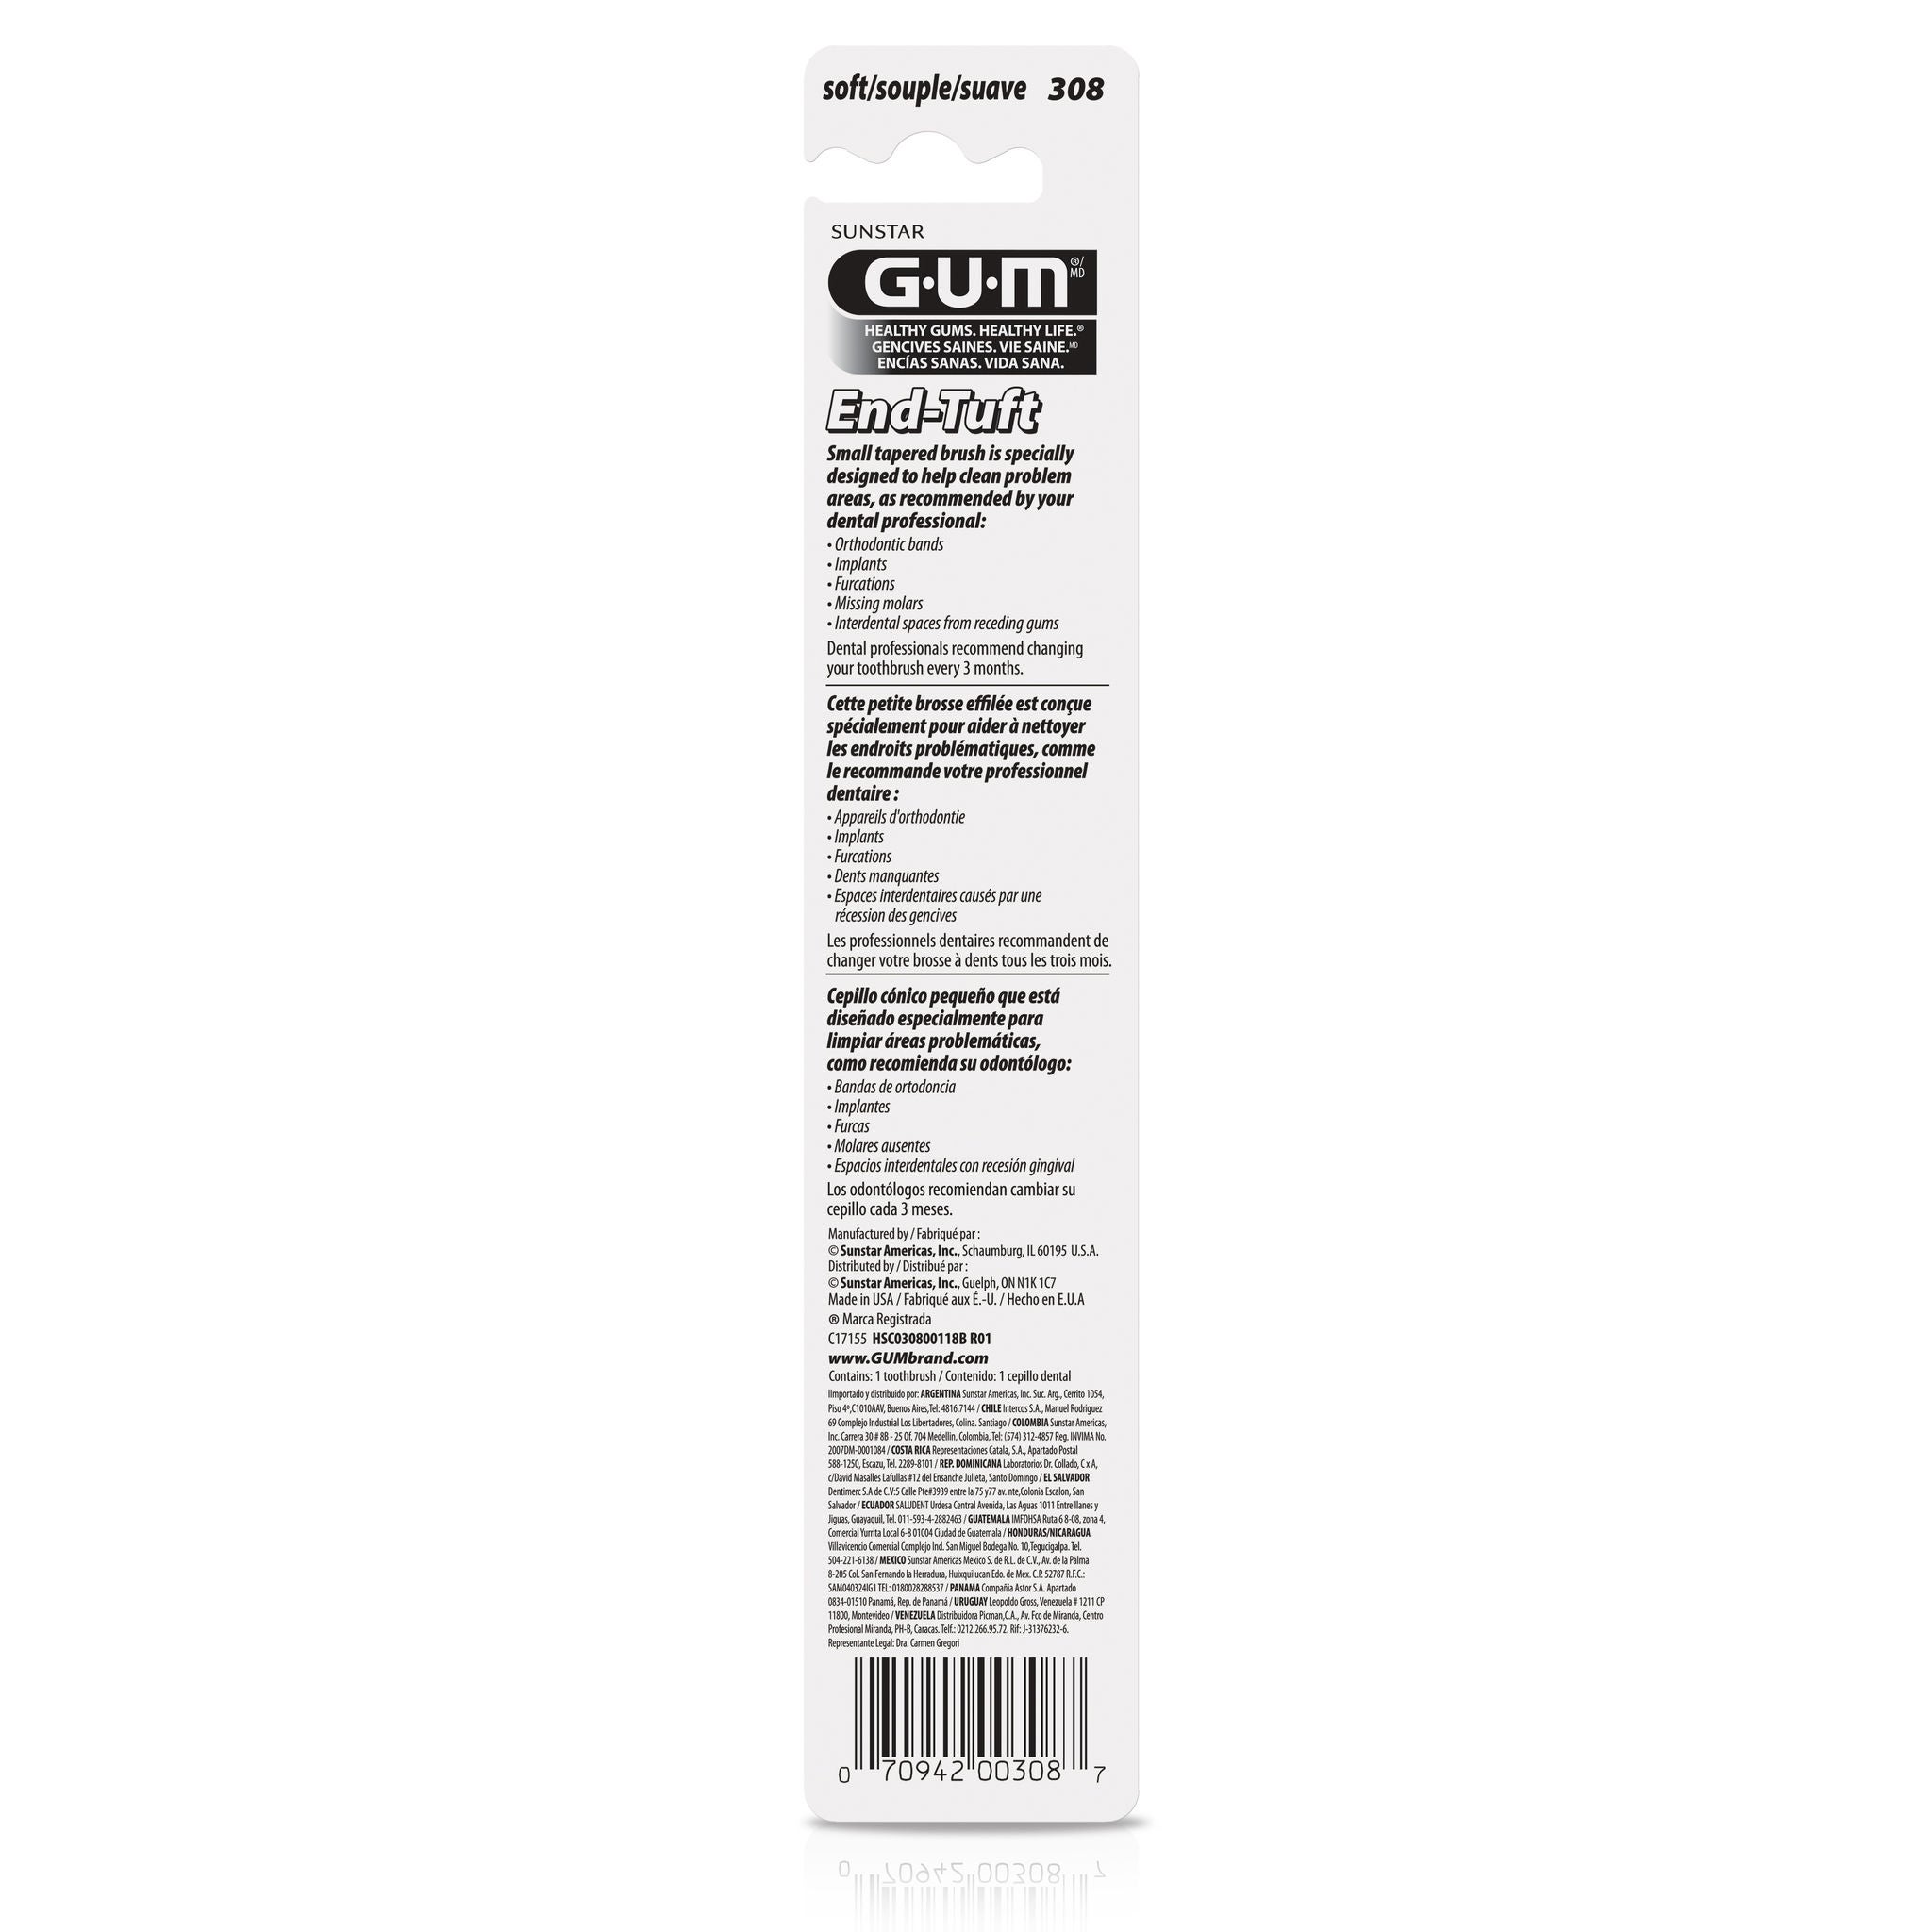 308RQB-Product-Packaging-Toothbrush-EndTuft-back-1ct.jpg